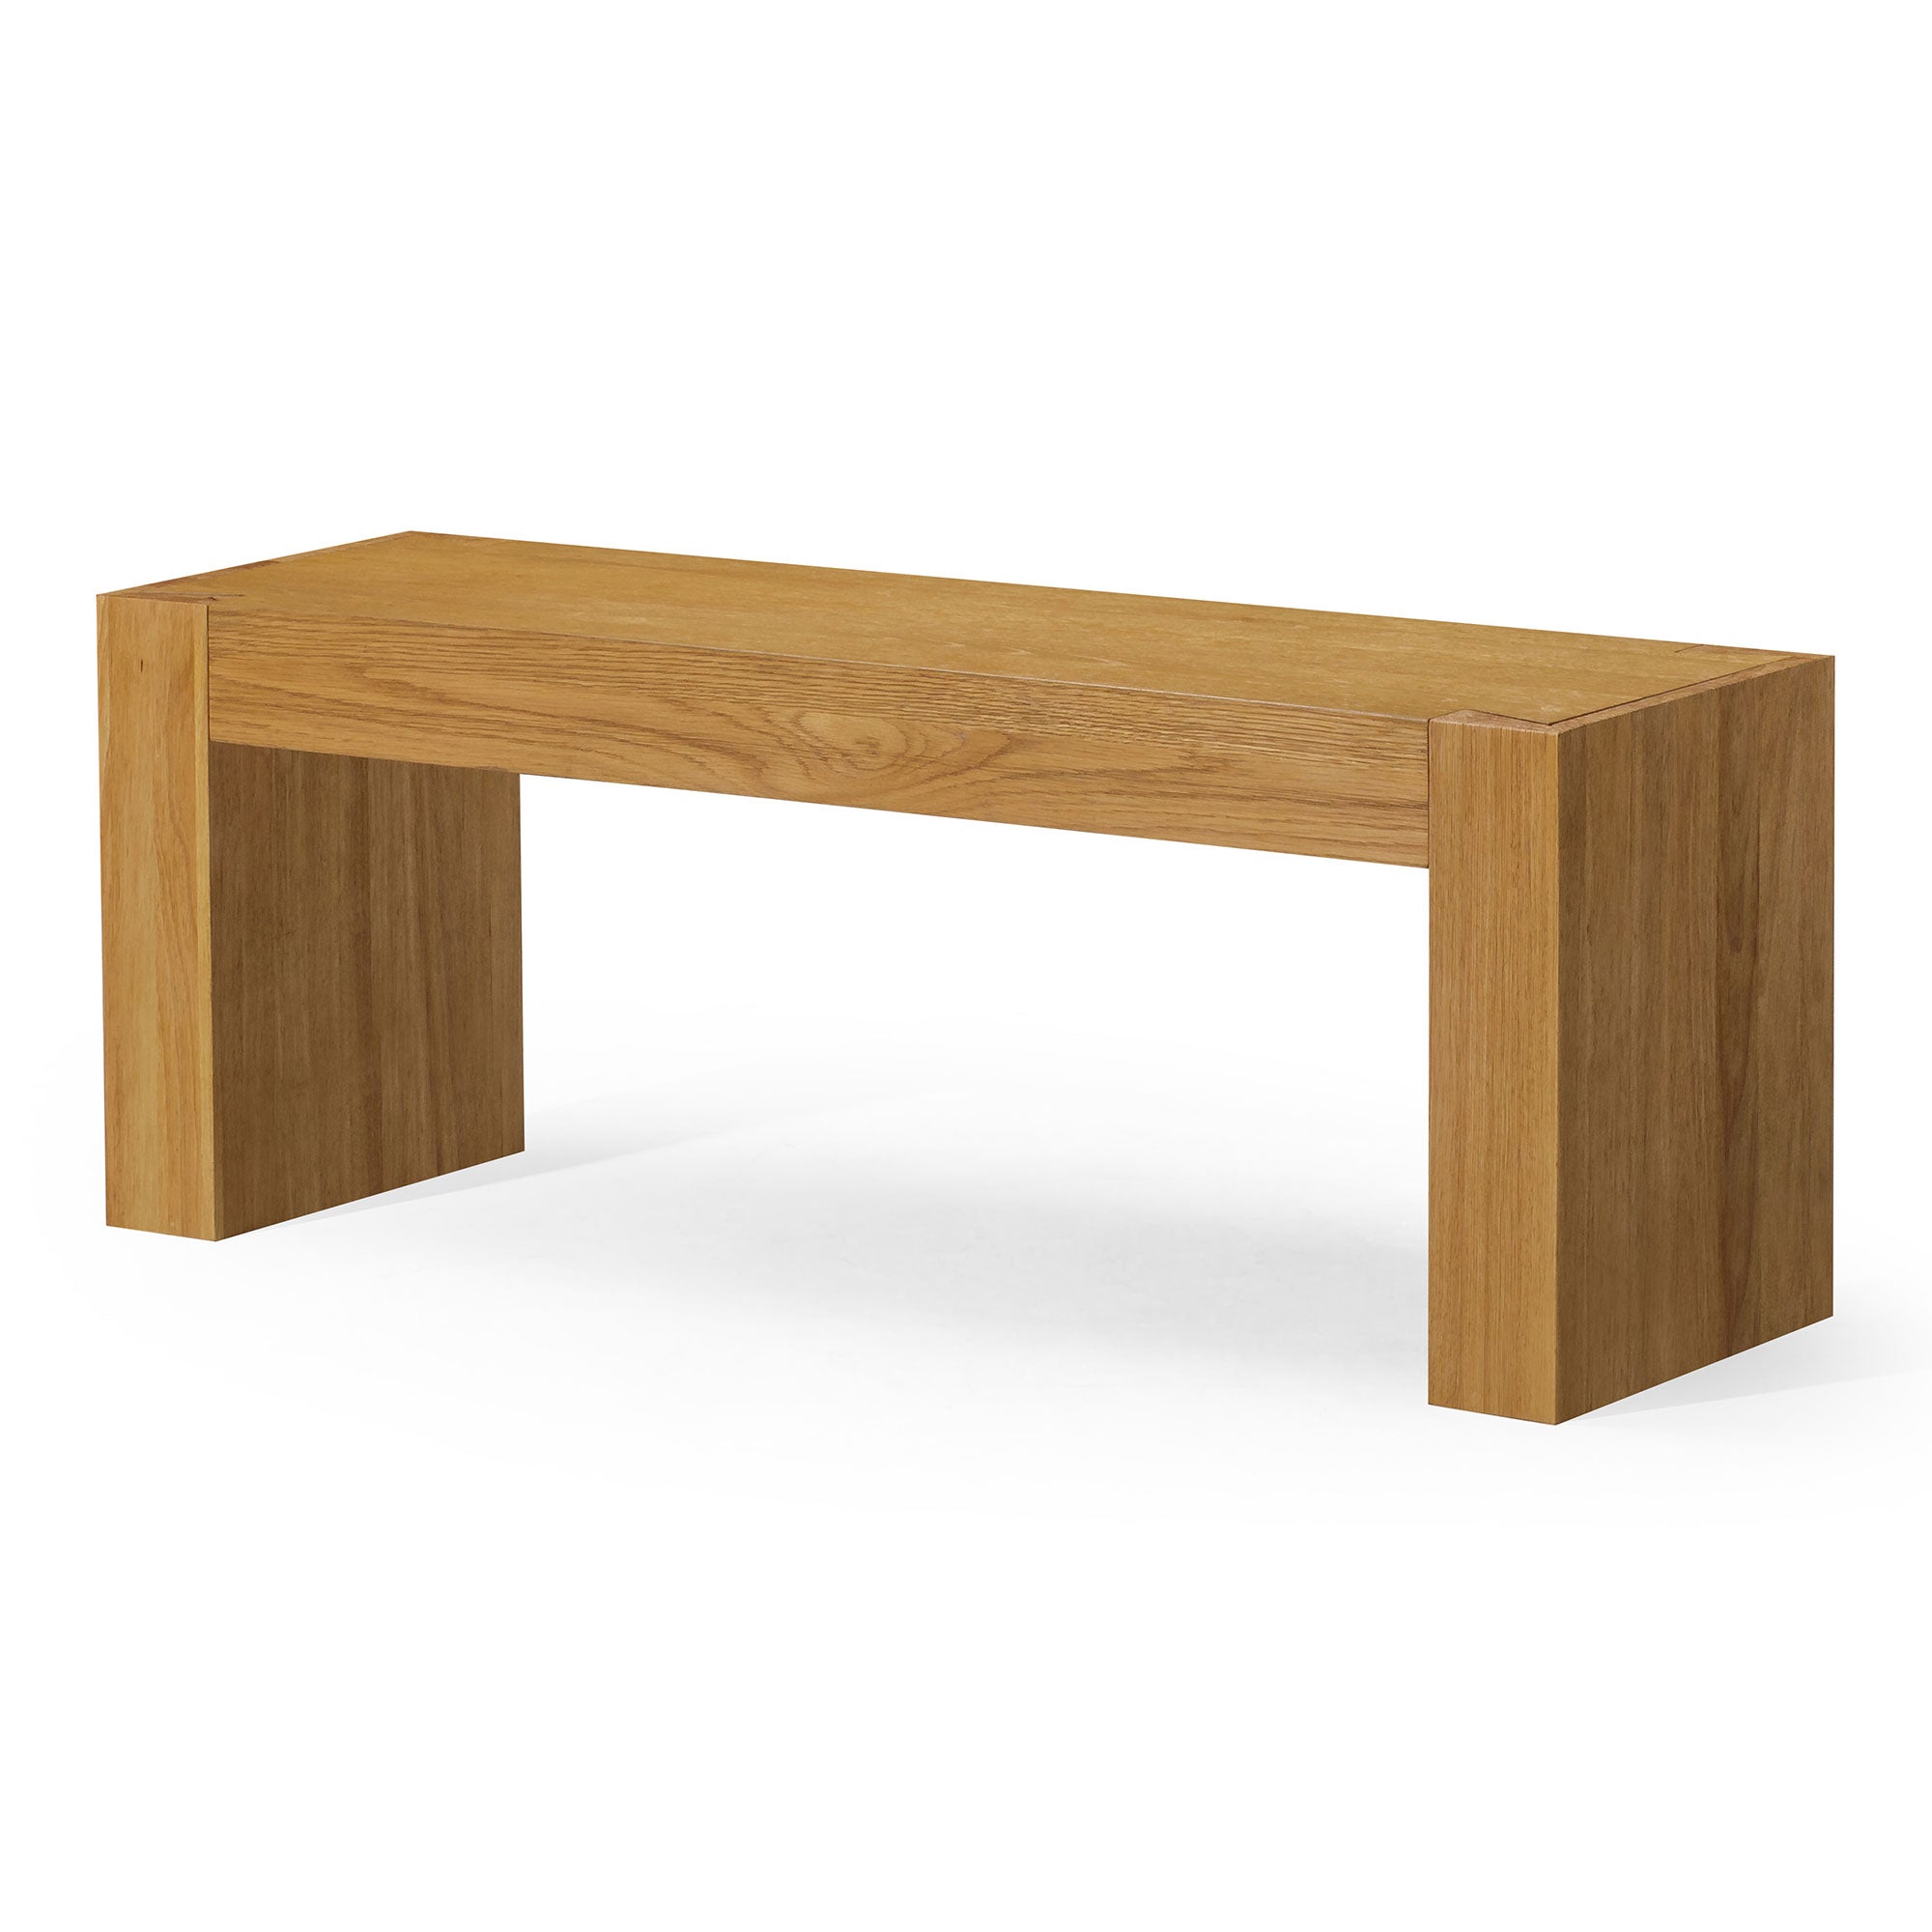 Zeno Organic Wooden Bench in Weathered Natural Finish in Ottomans & Benches by Maven Lane